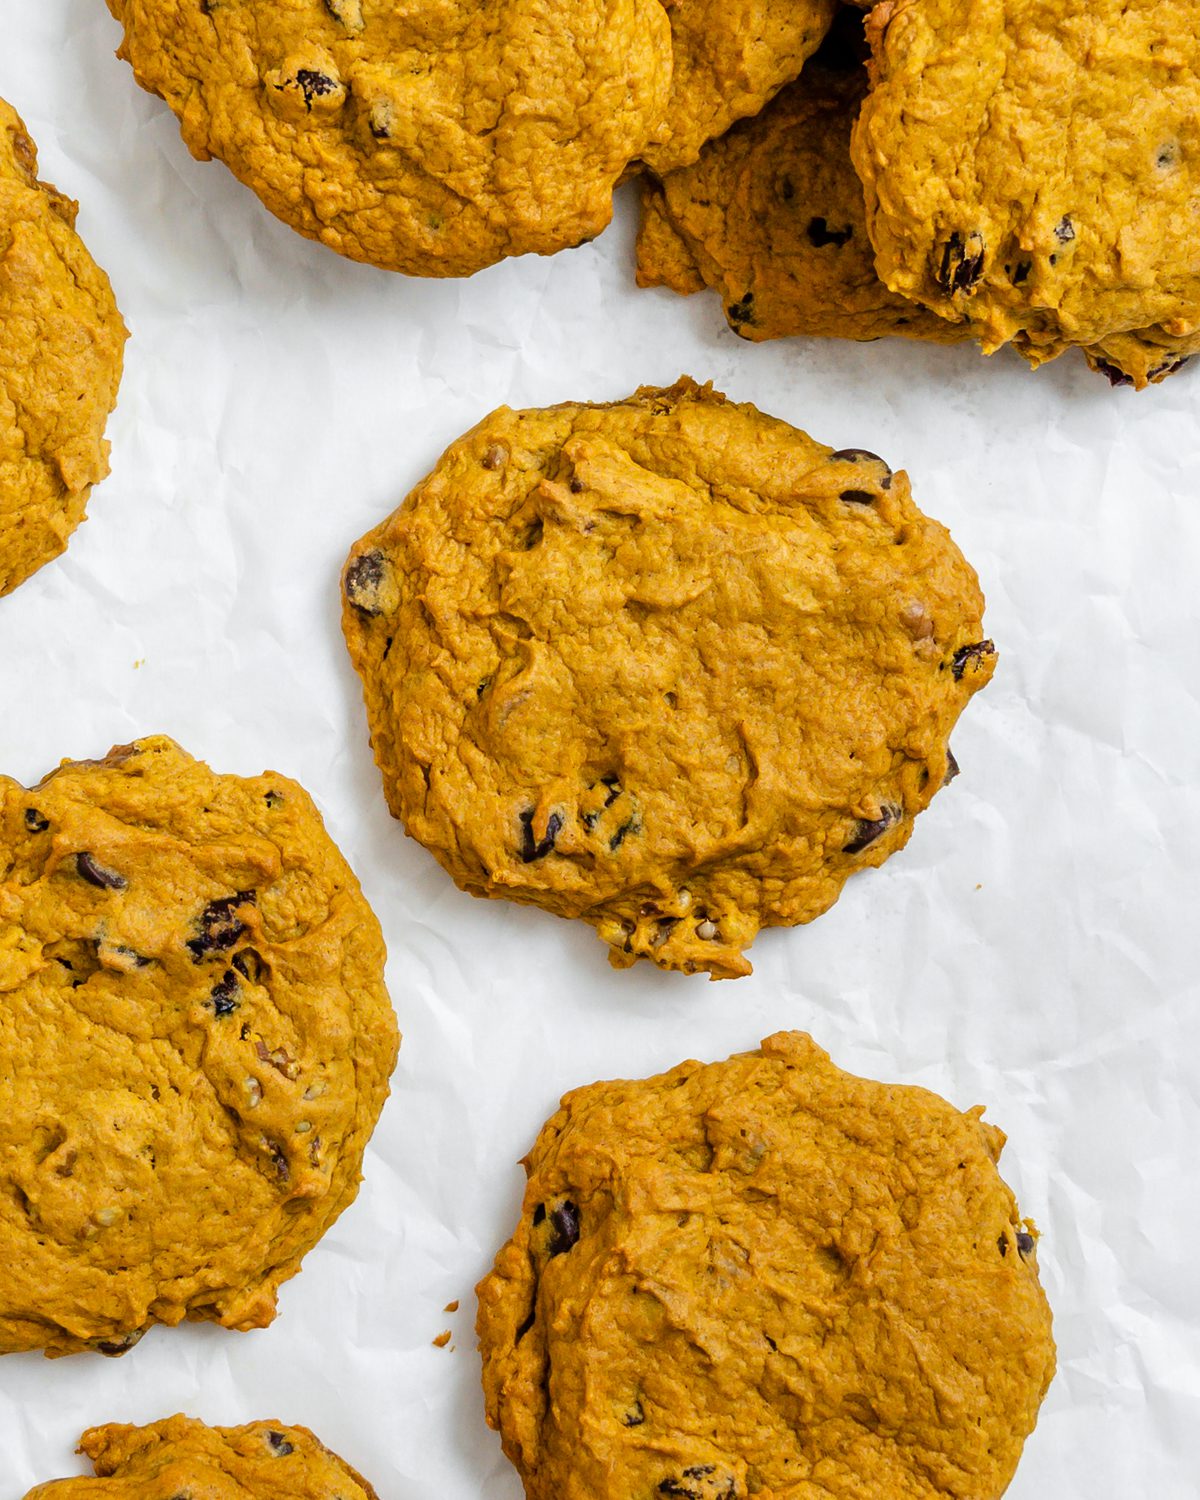 completed Soft Gluten-Free Pumpkin Cookies scattered on a white surface